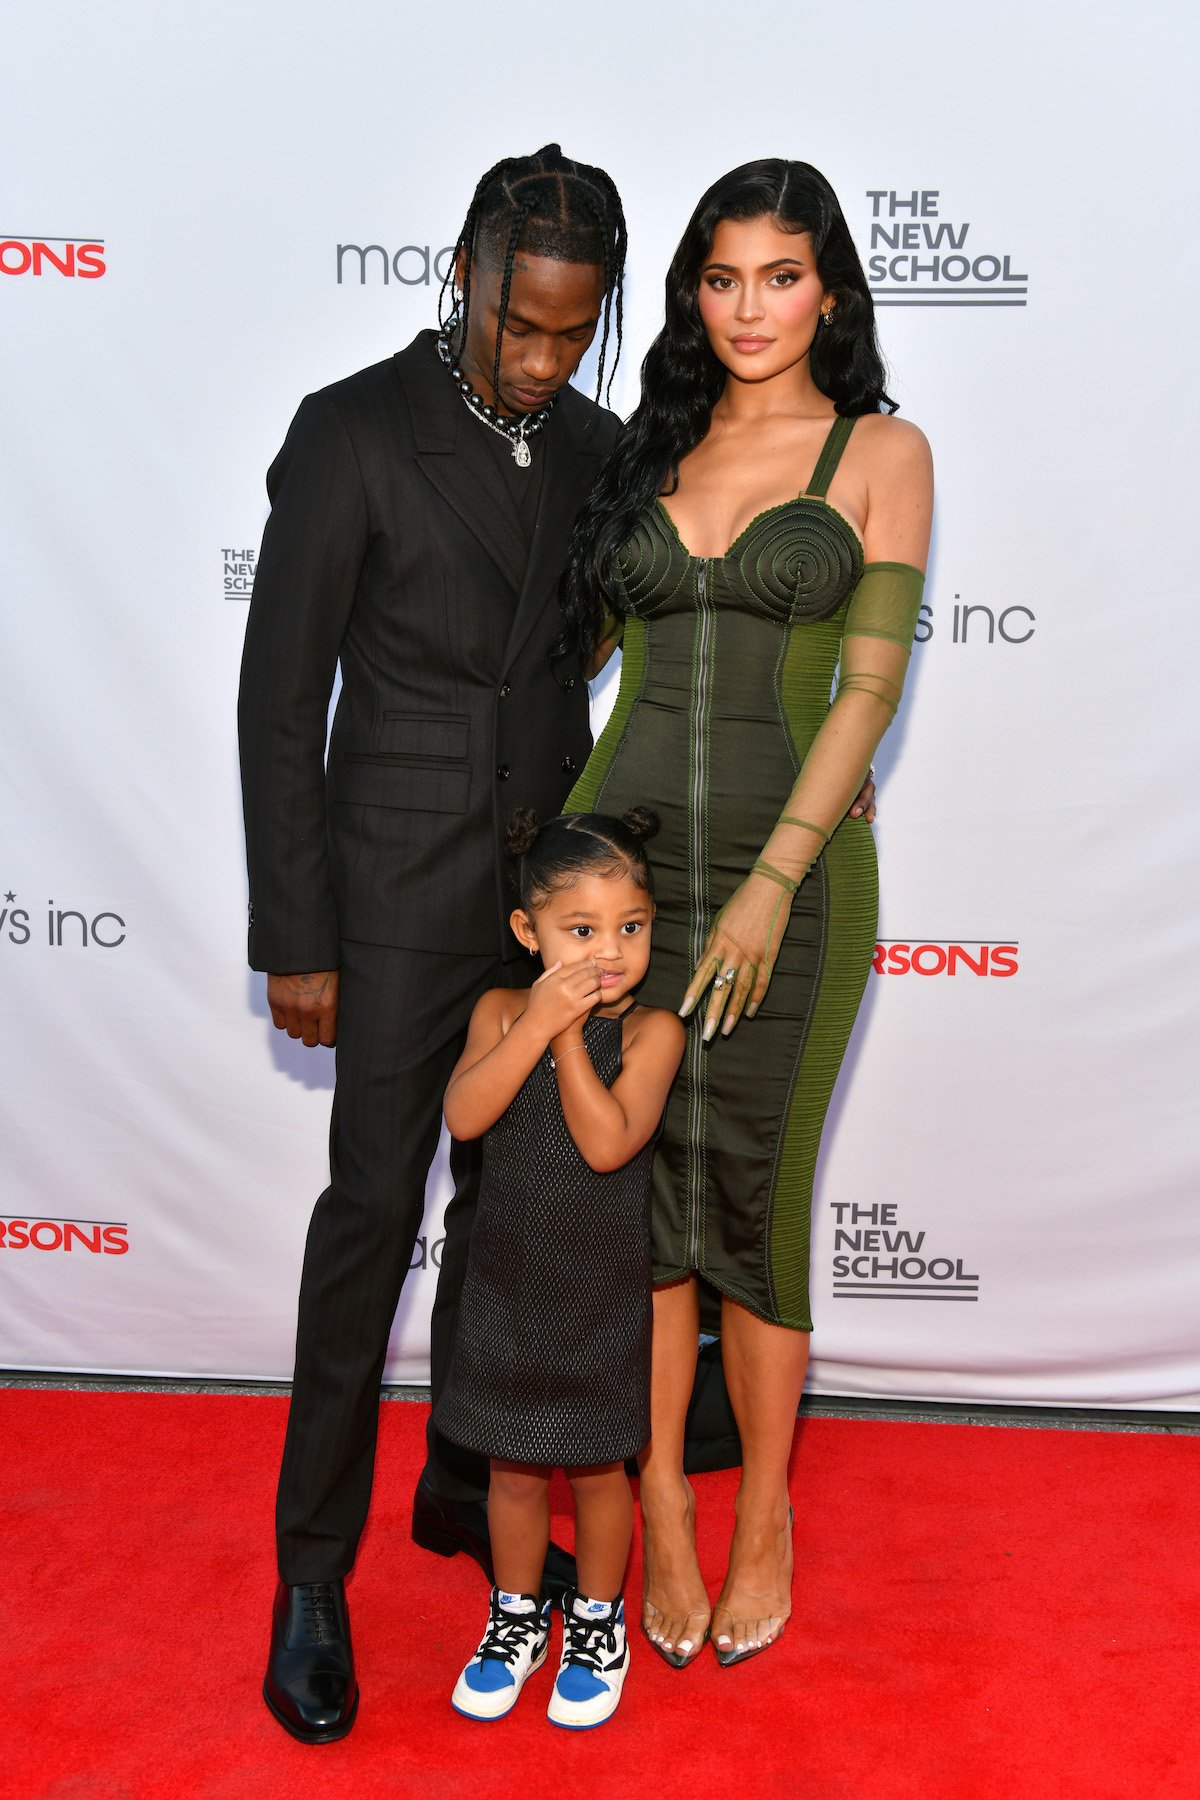 Travis Scott, Kylie Jenner, and their daughter Stormi Webster pose together at an event.